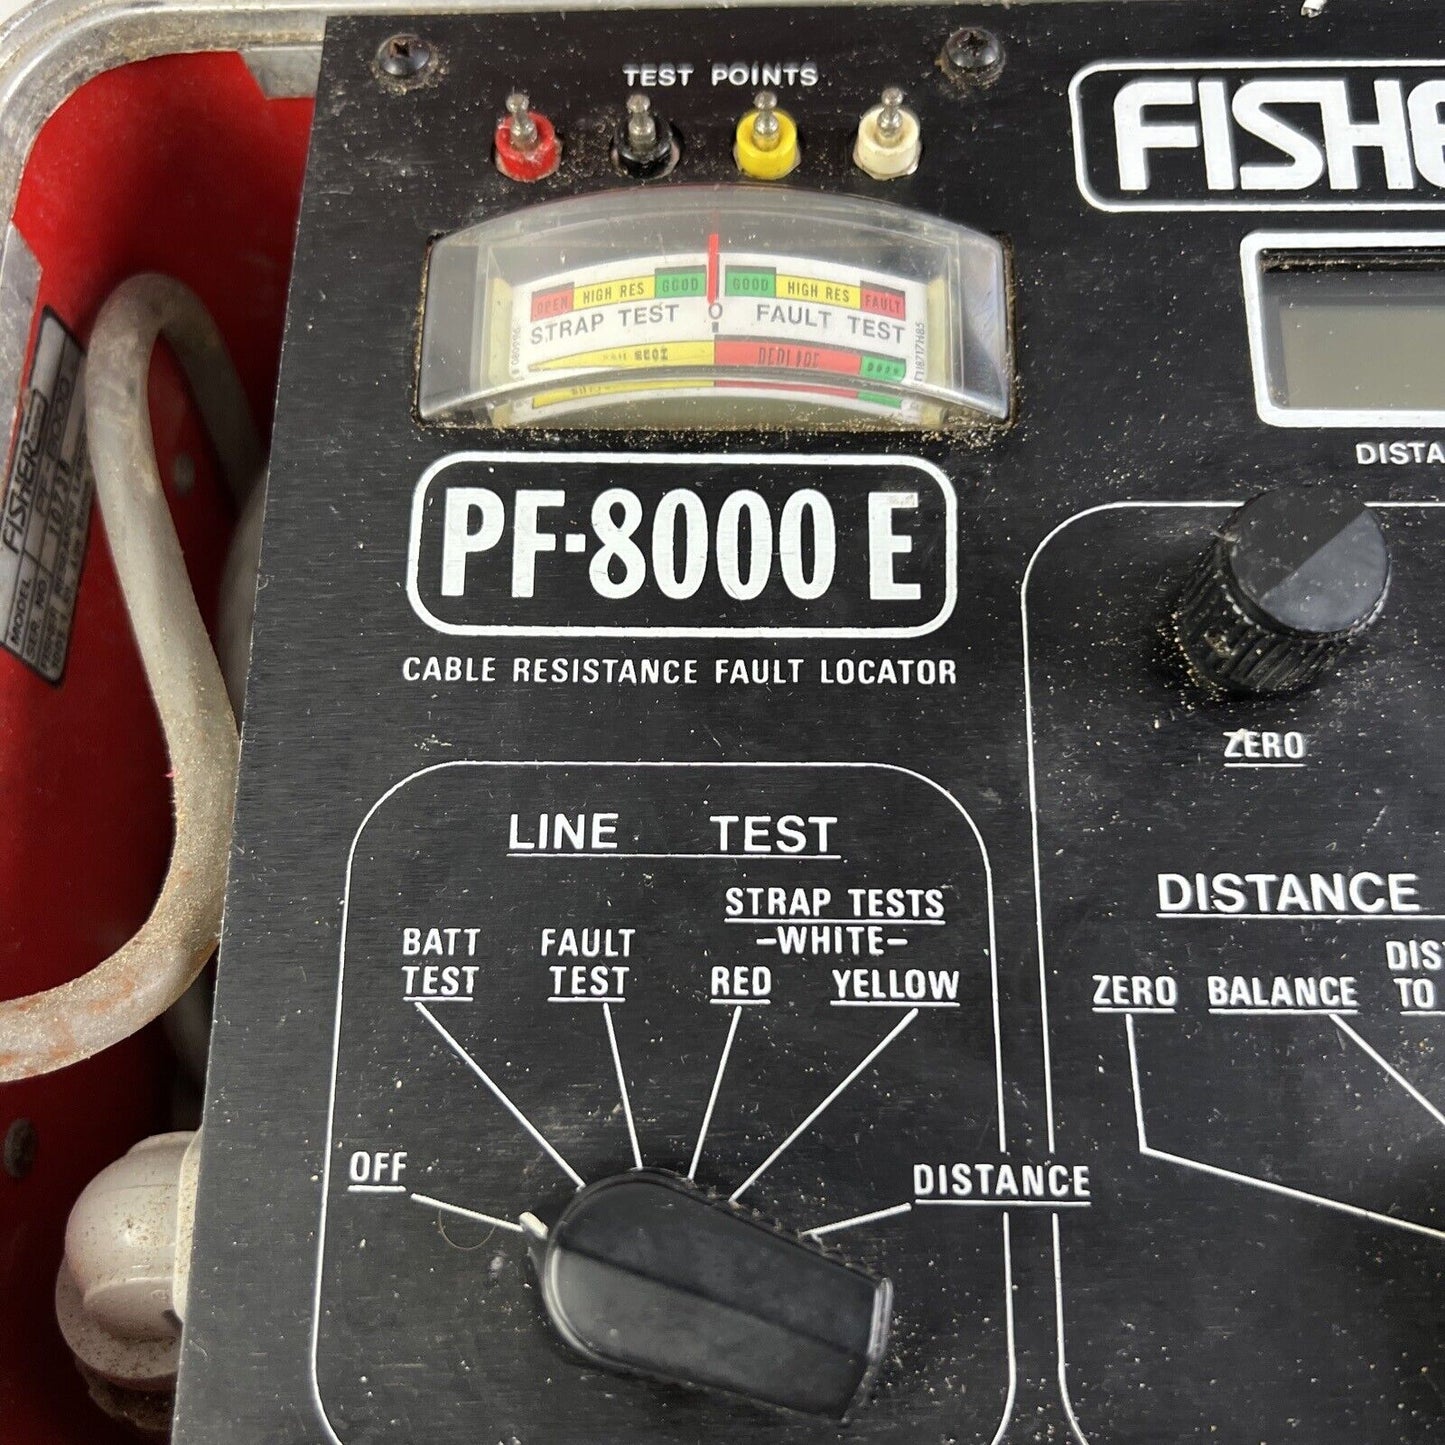 Fisher M-Scope PF-8000 E Cable Resistance Fault Locator Parts or Repair